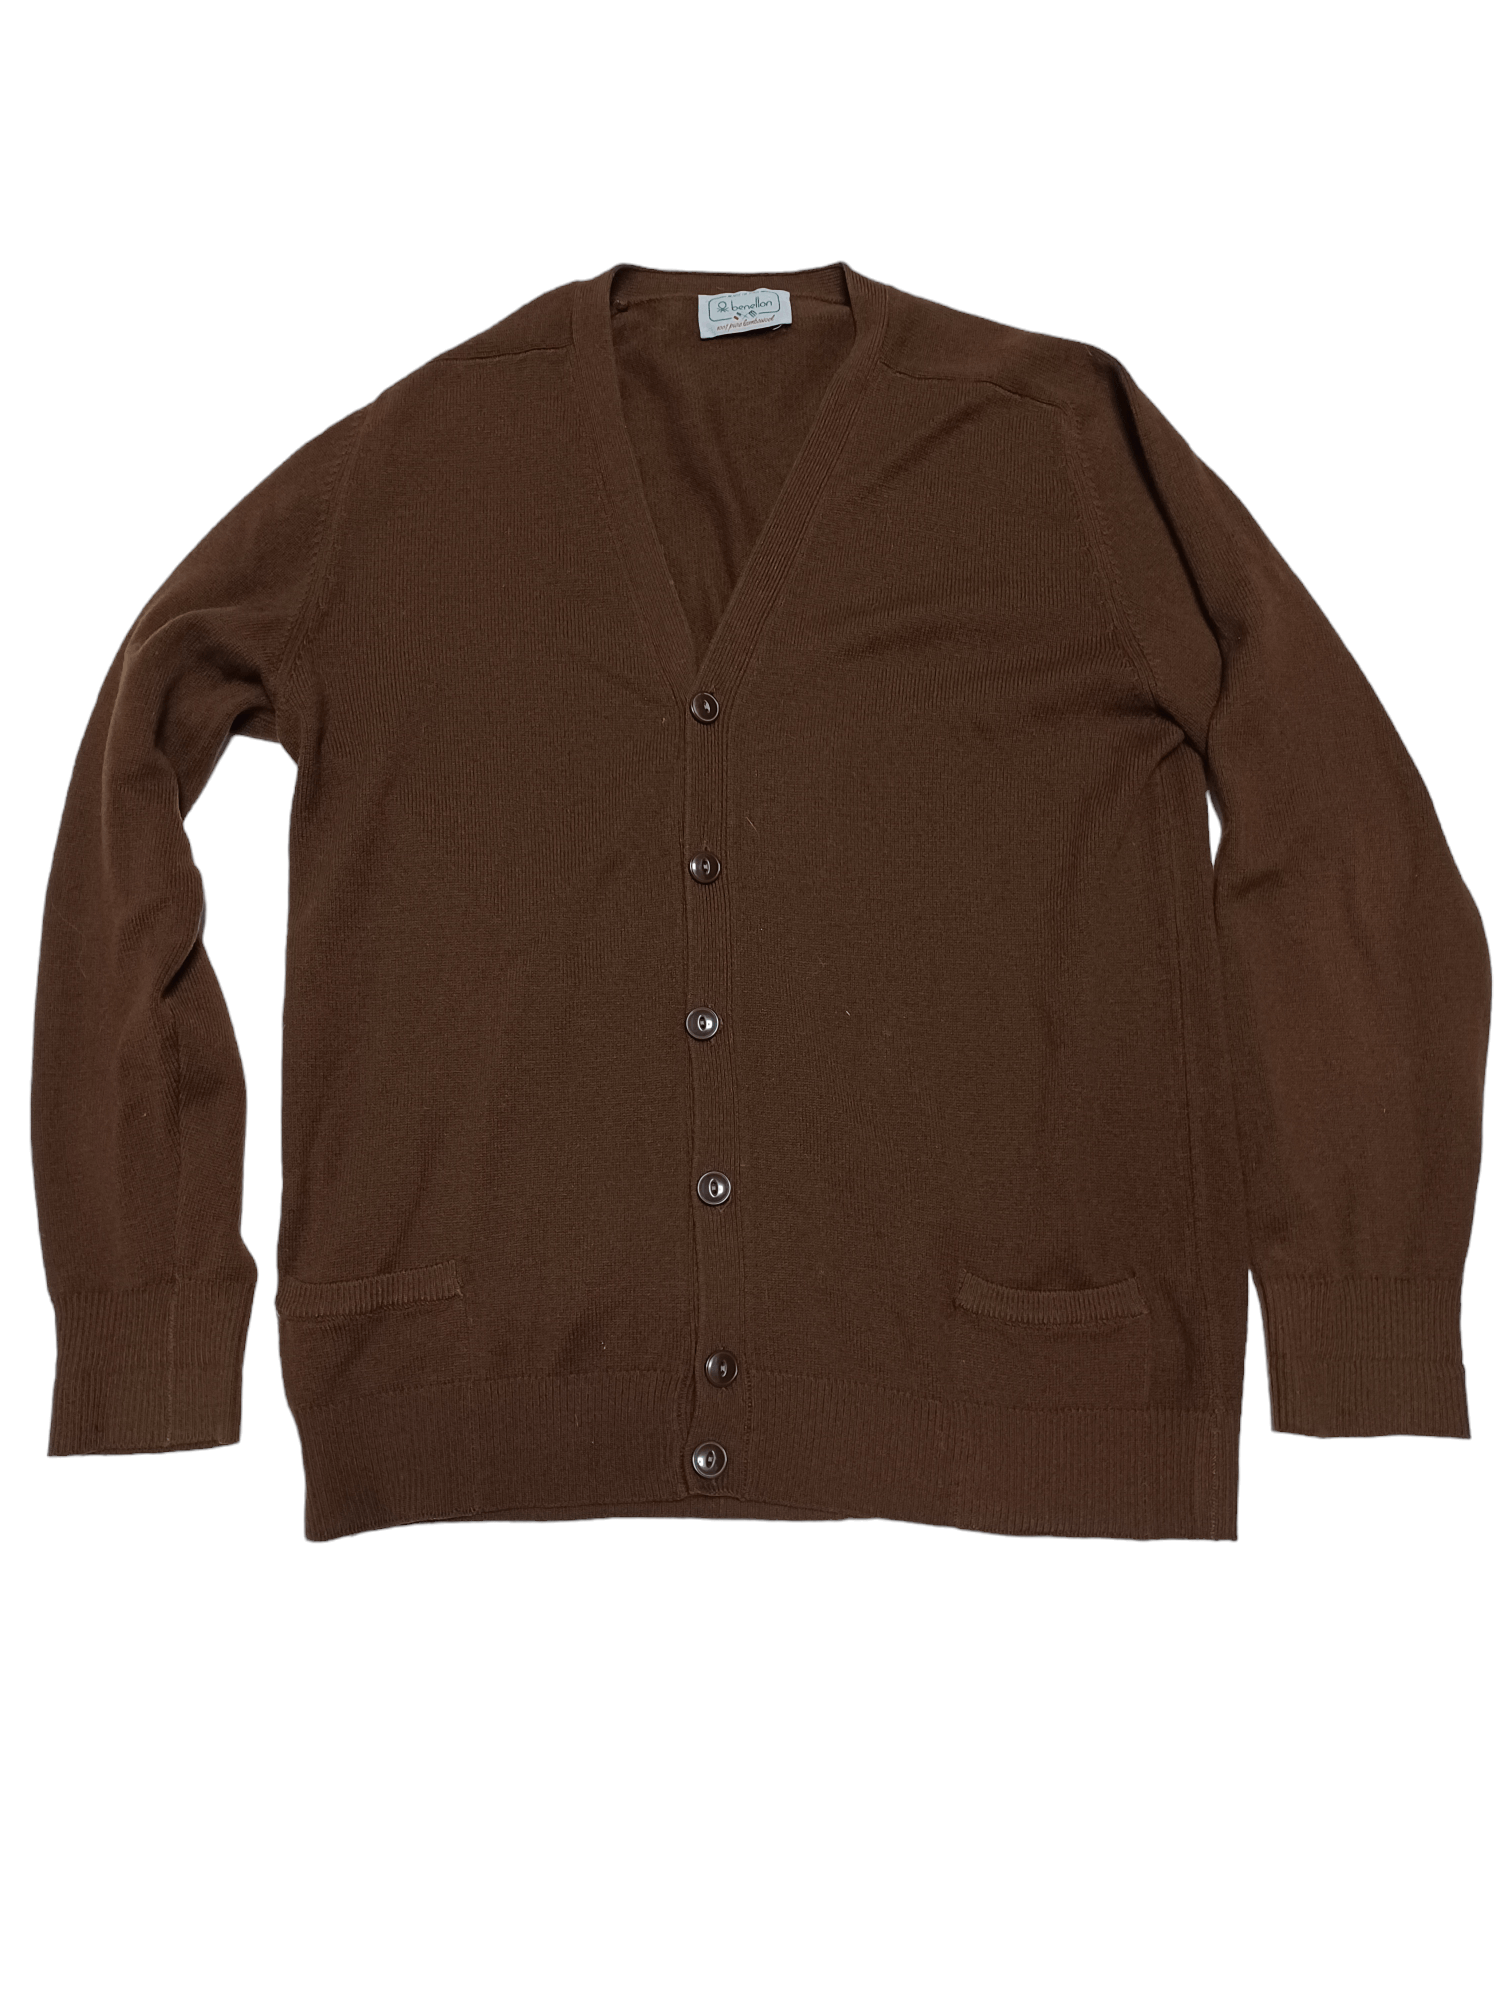 Pre-owned Benetton X Cardigan 100% Lambswool Vintage Made In Italy Benetton Cardigan In Chocolate Brown